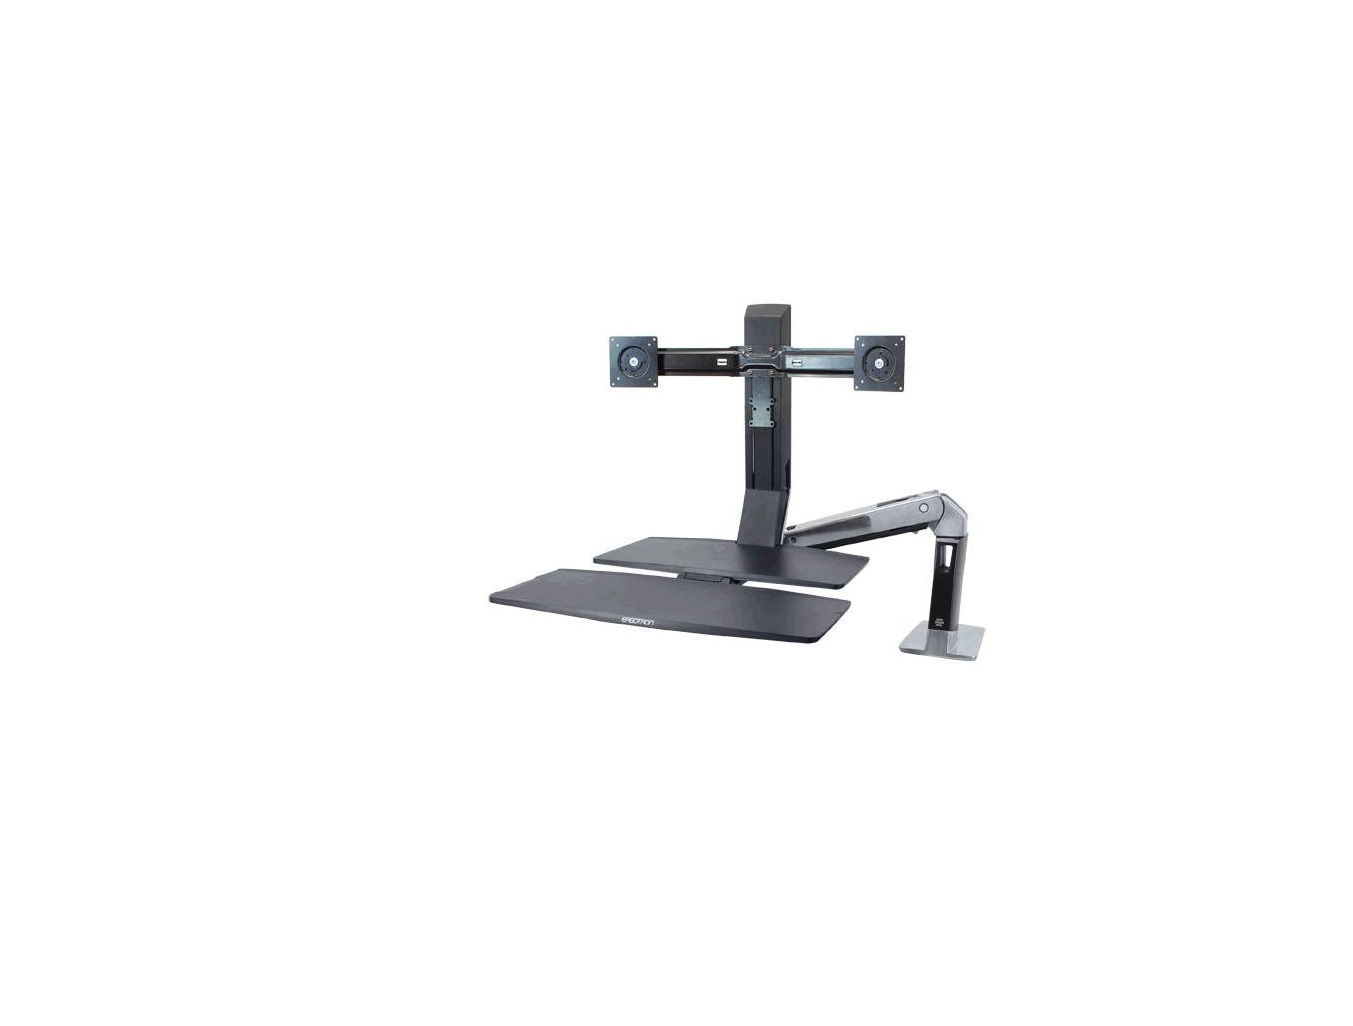 Ergotron WorkFit-A Dual Monitor 24 Sit-Stand With Worksurface Aluminum Polished 24-316-026 (New Unused)